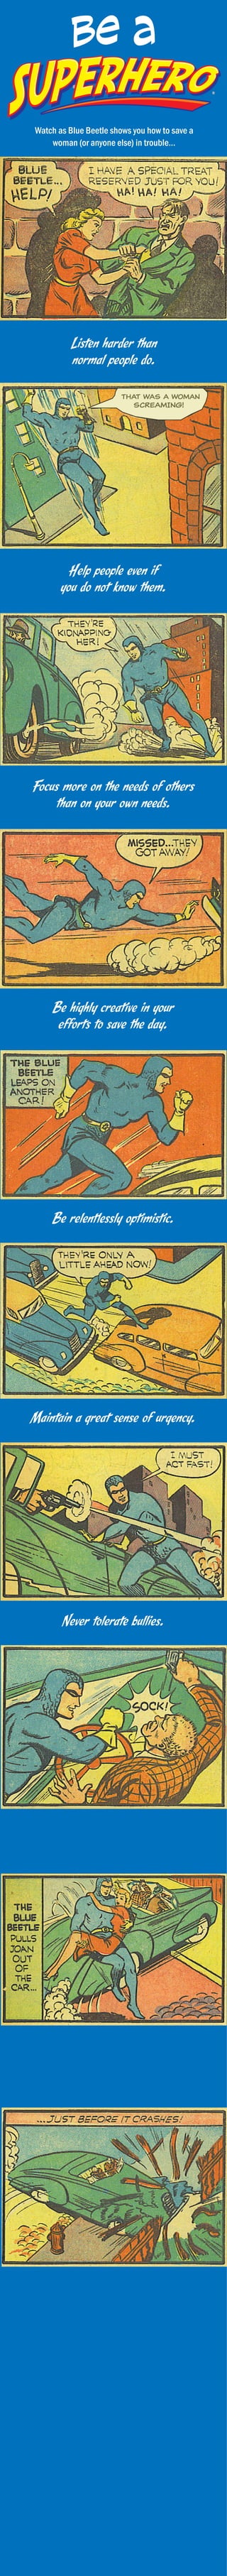 be a
Watch as Blue Beetle shows you how to save a
woman (or anyone else) in trouble...

Listen harder than
normal people do.

Help people even if
you do not know them.

Focus more on the needs of others
than on your own needs.

Be highly creative in your
efforts to save the day.

Be relentlessly optimistic.

Maintain a great sense of urgency.

Never tolerate bullies.

Don’t stop trying until
the job is done.

Take no pleasure in the misfortune
of others
(even if they sorta deserve it.)

To be a superhero,
you do not need
superpwers.
You simply need to focus
on the needs
of others... relentlessly.
CREATED BY BRUCE KASANOFF
KASANOFF.COM
ILLUSTRATIONS OF THE BLUE BEETLE
BY CHARLES NICHOLAS

 